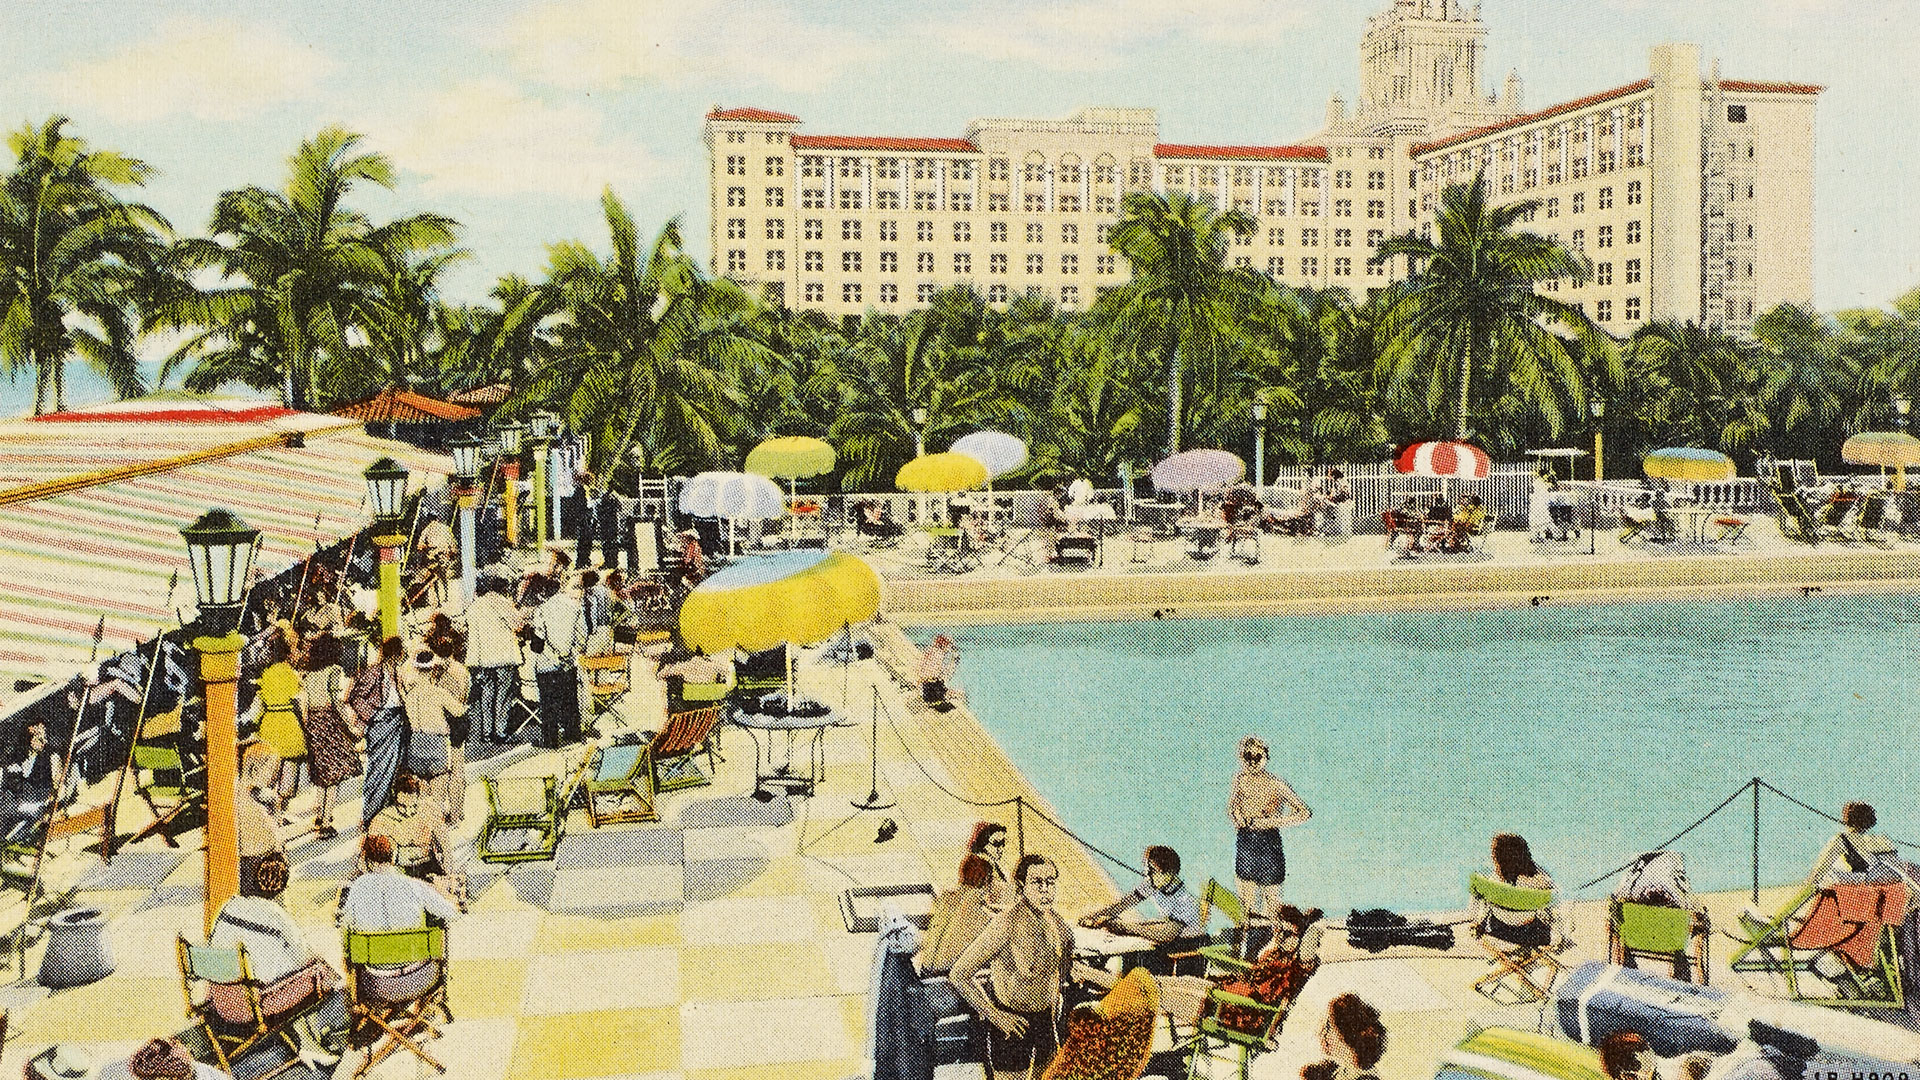 Postcard of a hotel club and pool